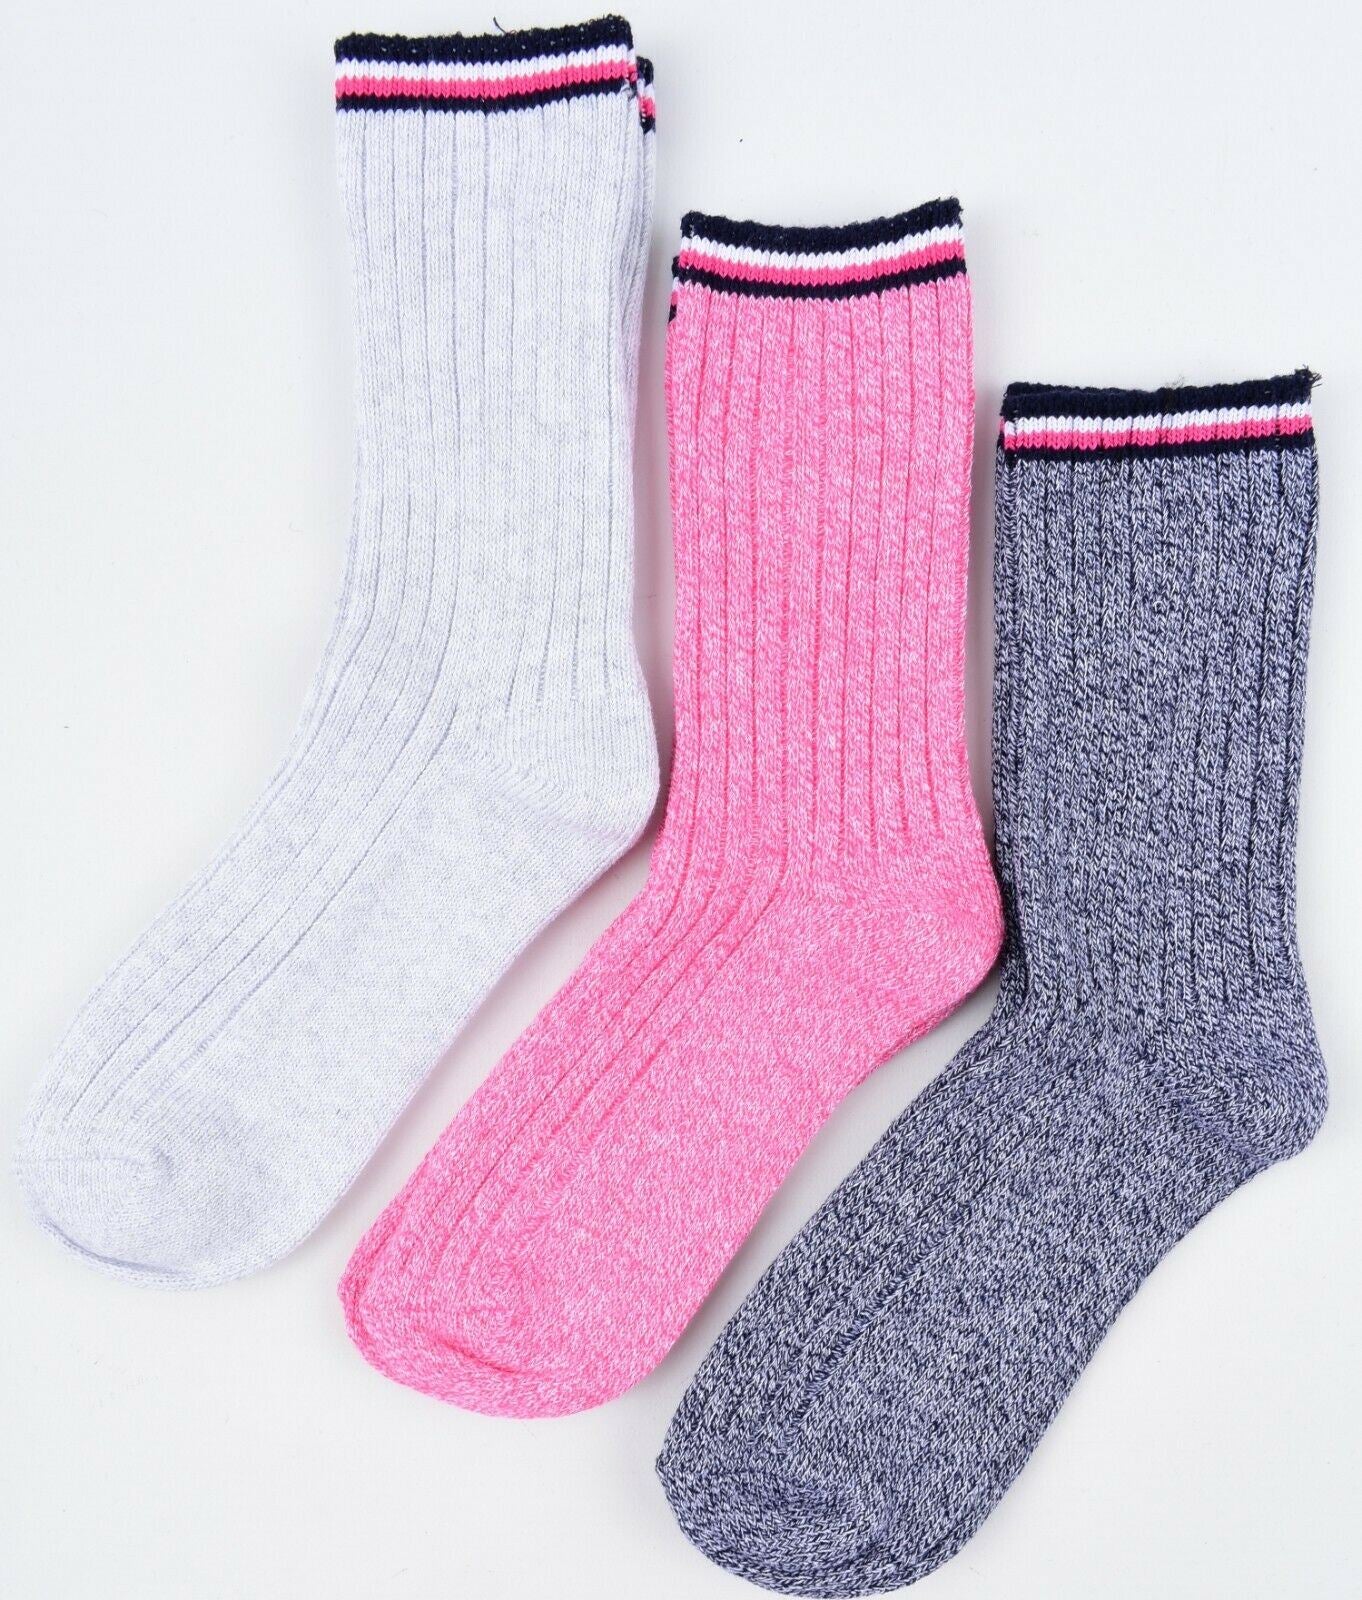 TOMMY HILFIGER 3-pack Girls' Camper Socks, Grey/Pink/Charcoal, size 4-7 years